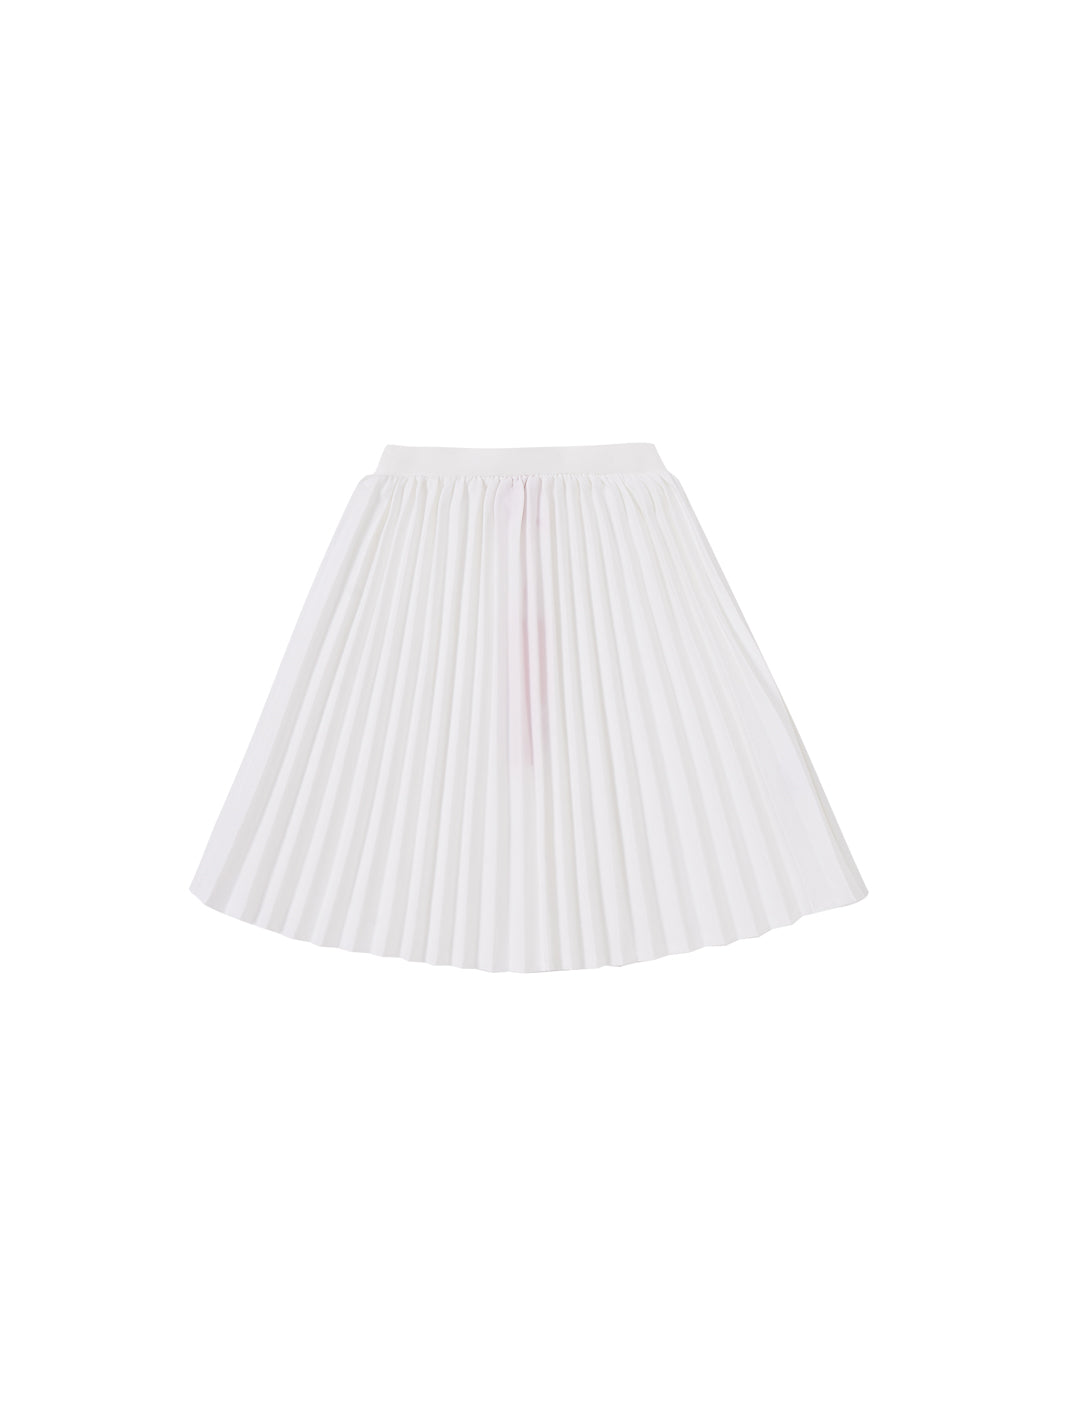 Solid Accordion Pleated Skirt - Winter white